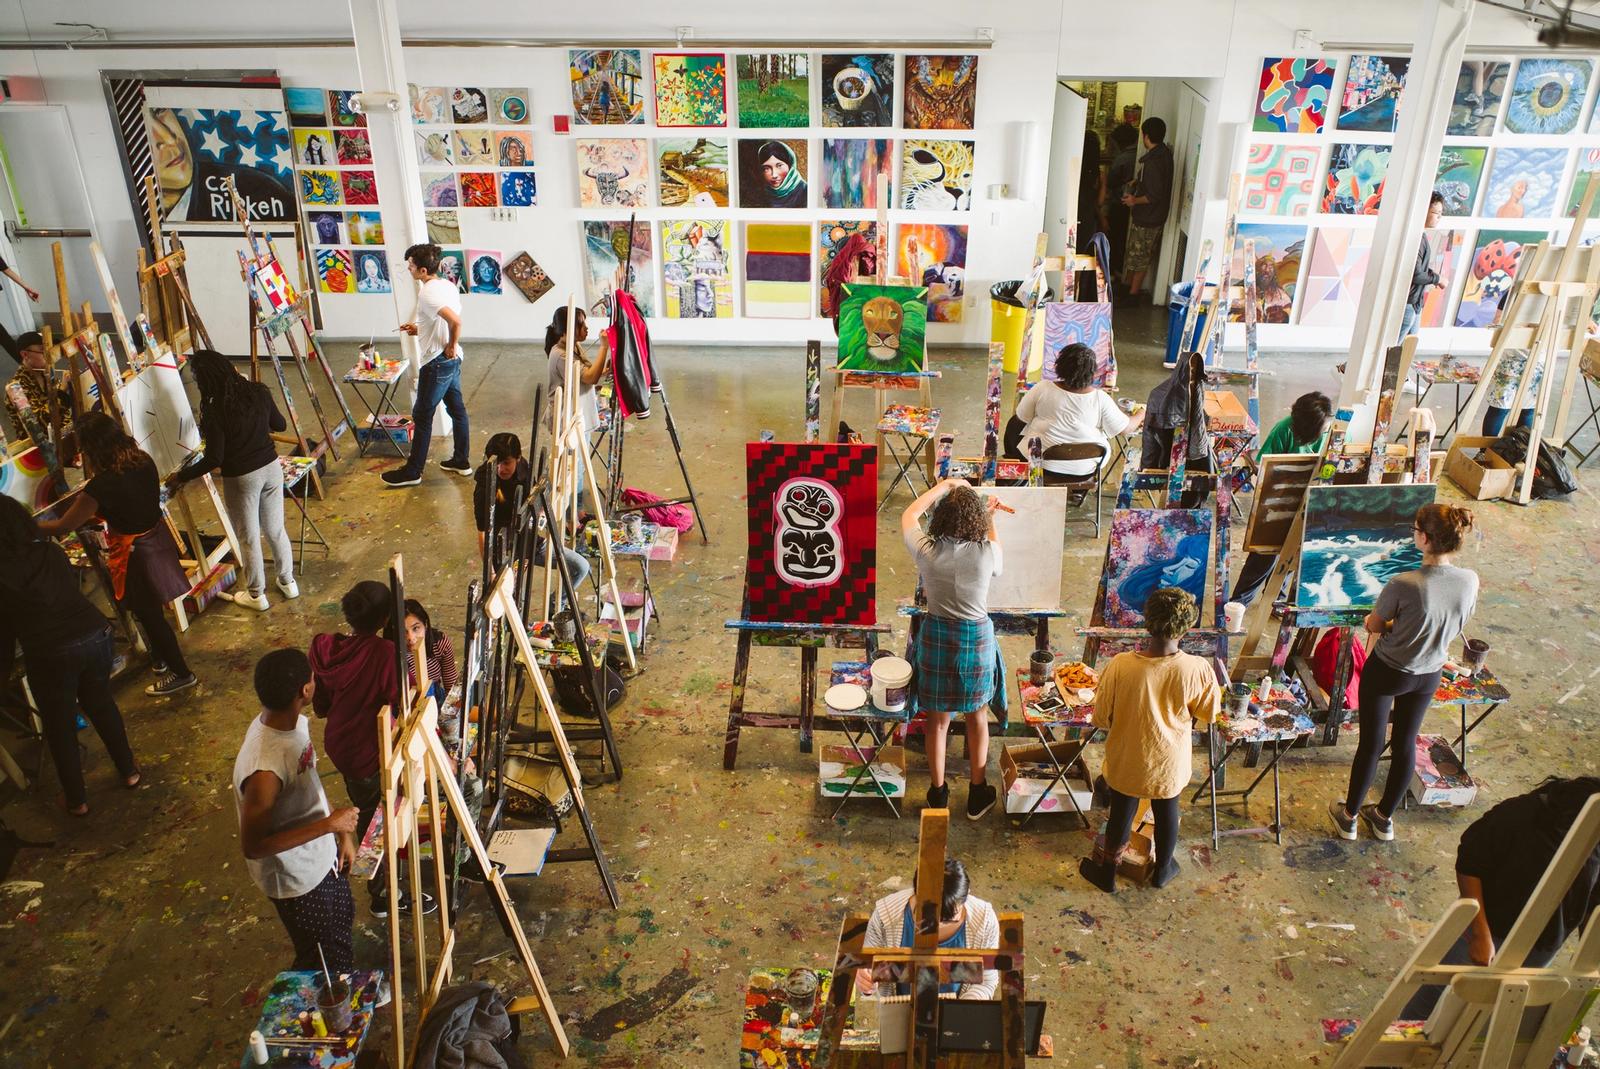 Teen artists at work at their easel's in our expansive Painting Studio